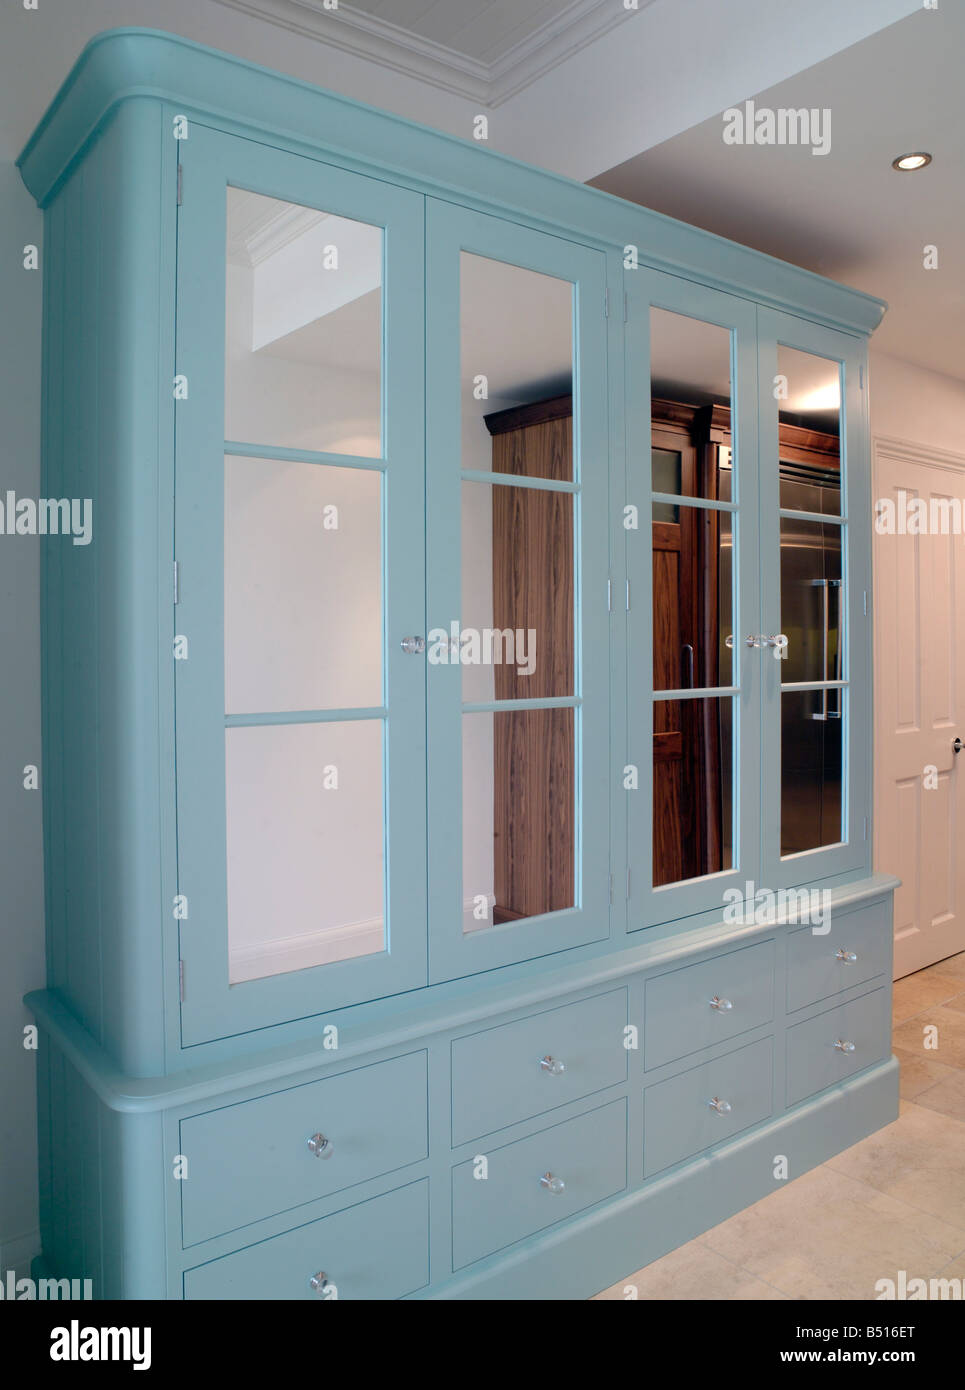 Kitchen or bedroom unit painted blue with mirror doors. Drawers below Stock Photo